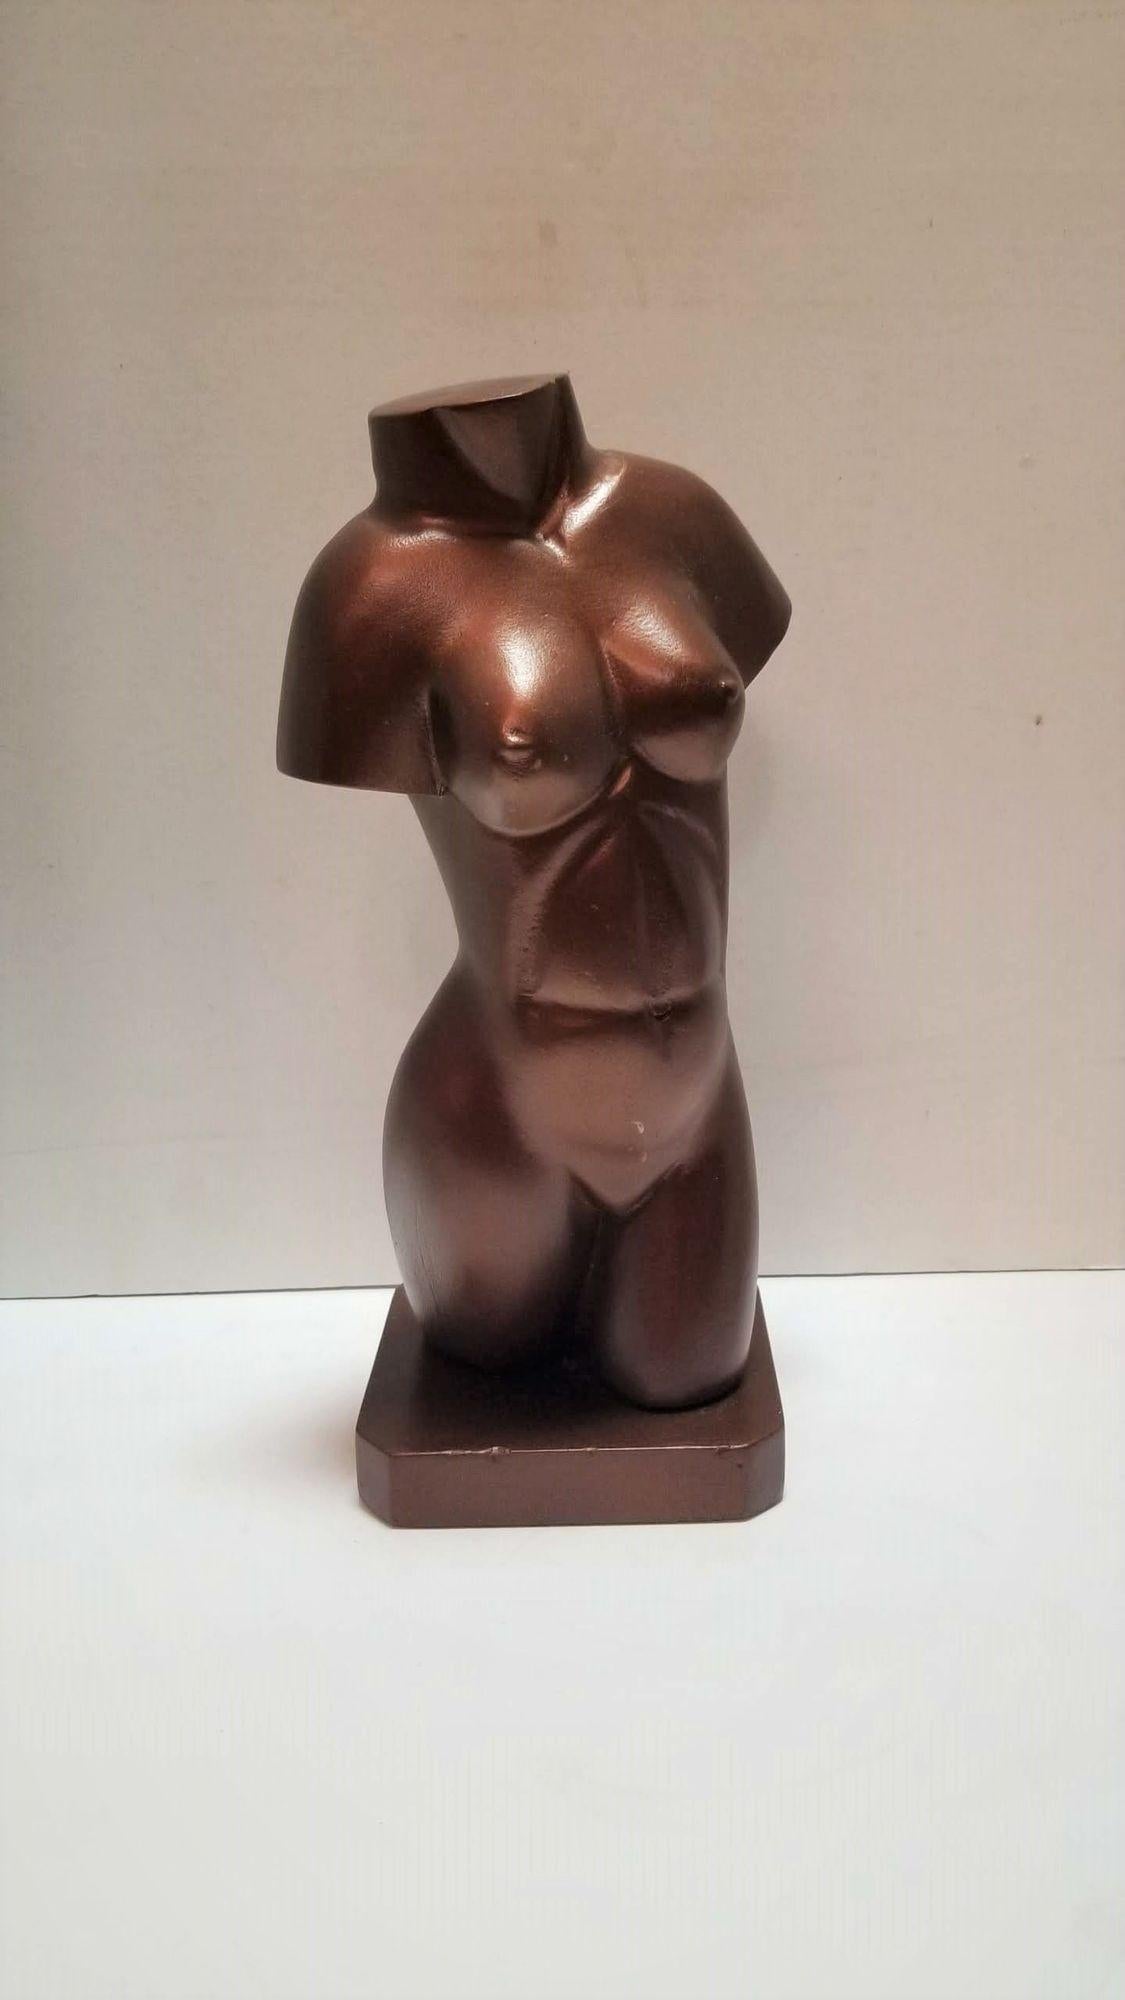 Wooden Statue of Nude Female Bust in Bronze Finish
A vintage wooden sculpture of a female nude bust painted bronze that captures the essence of the female form. The use of wood as the primary material adds a lightweight quality, while the painted